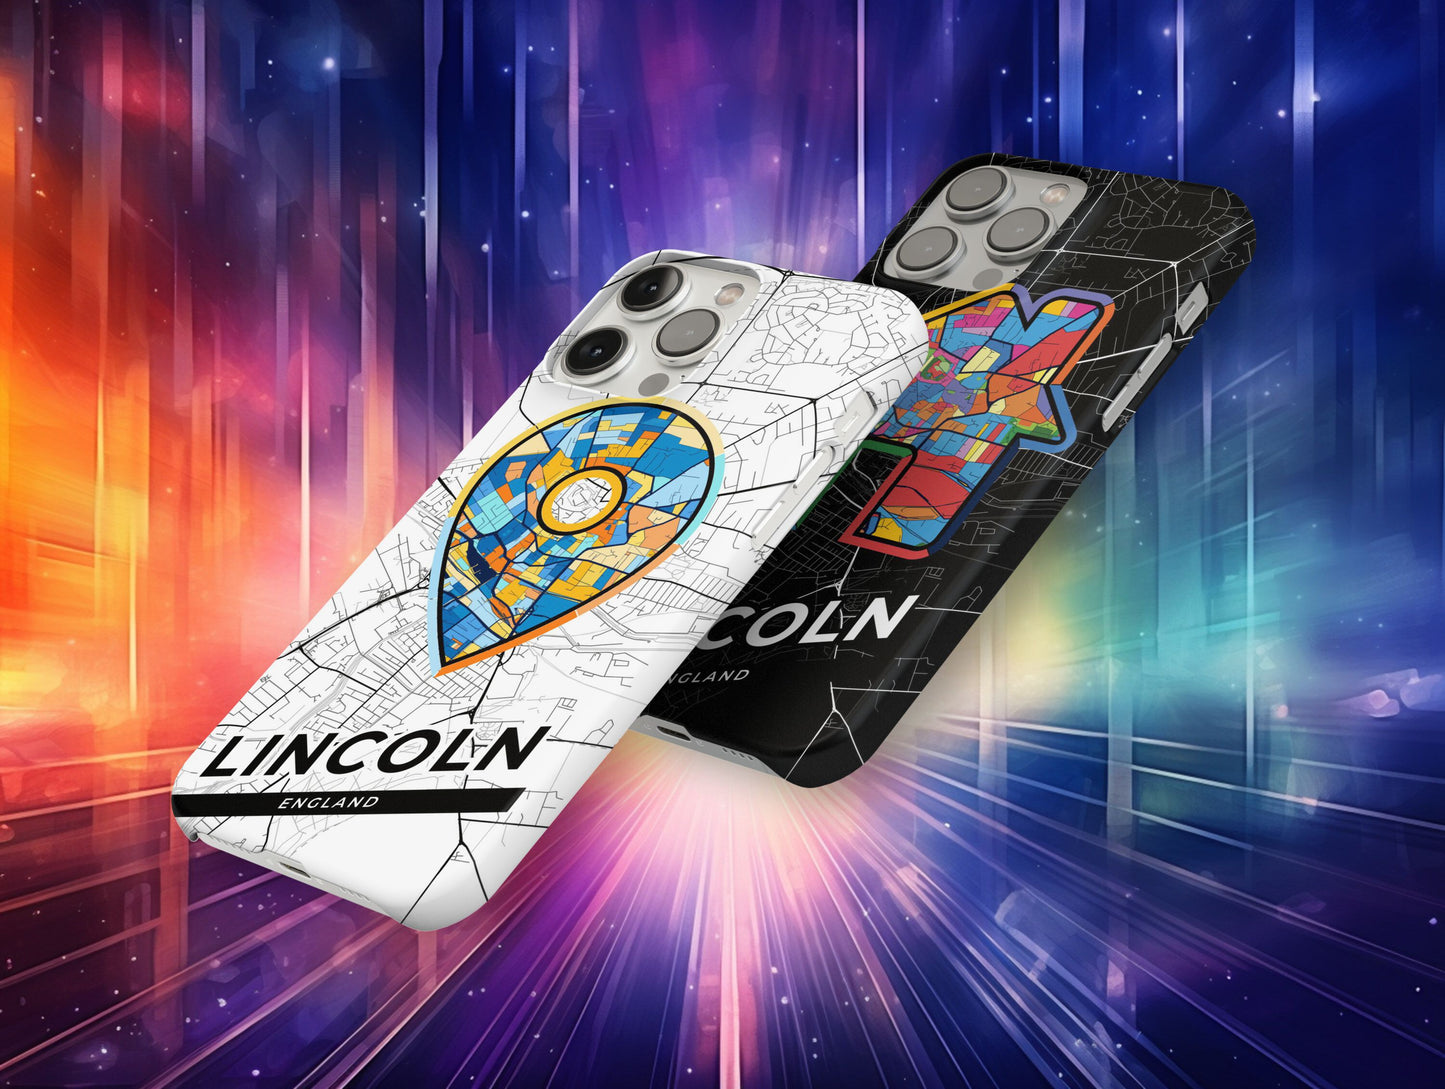 Lincoln England slim phone case with colorful icon. Birthday, wedding or housewarming gift. Couple match cases.